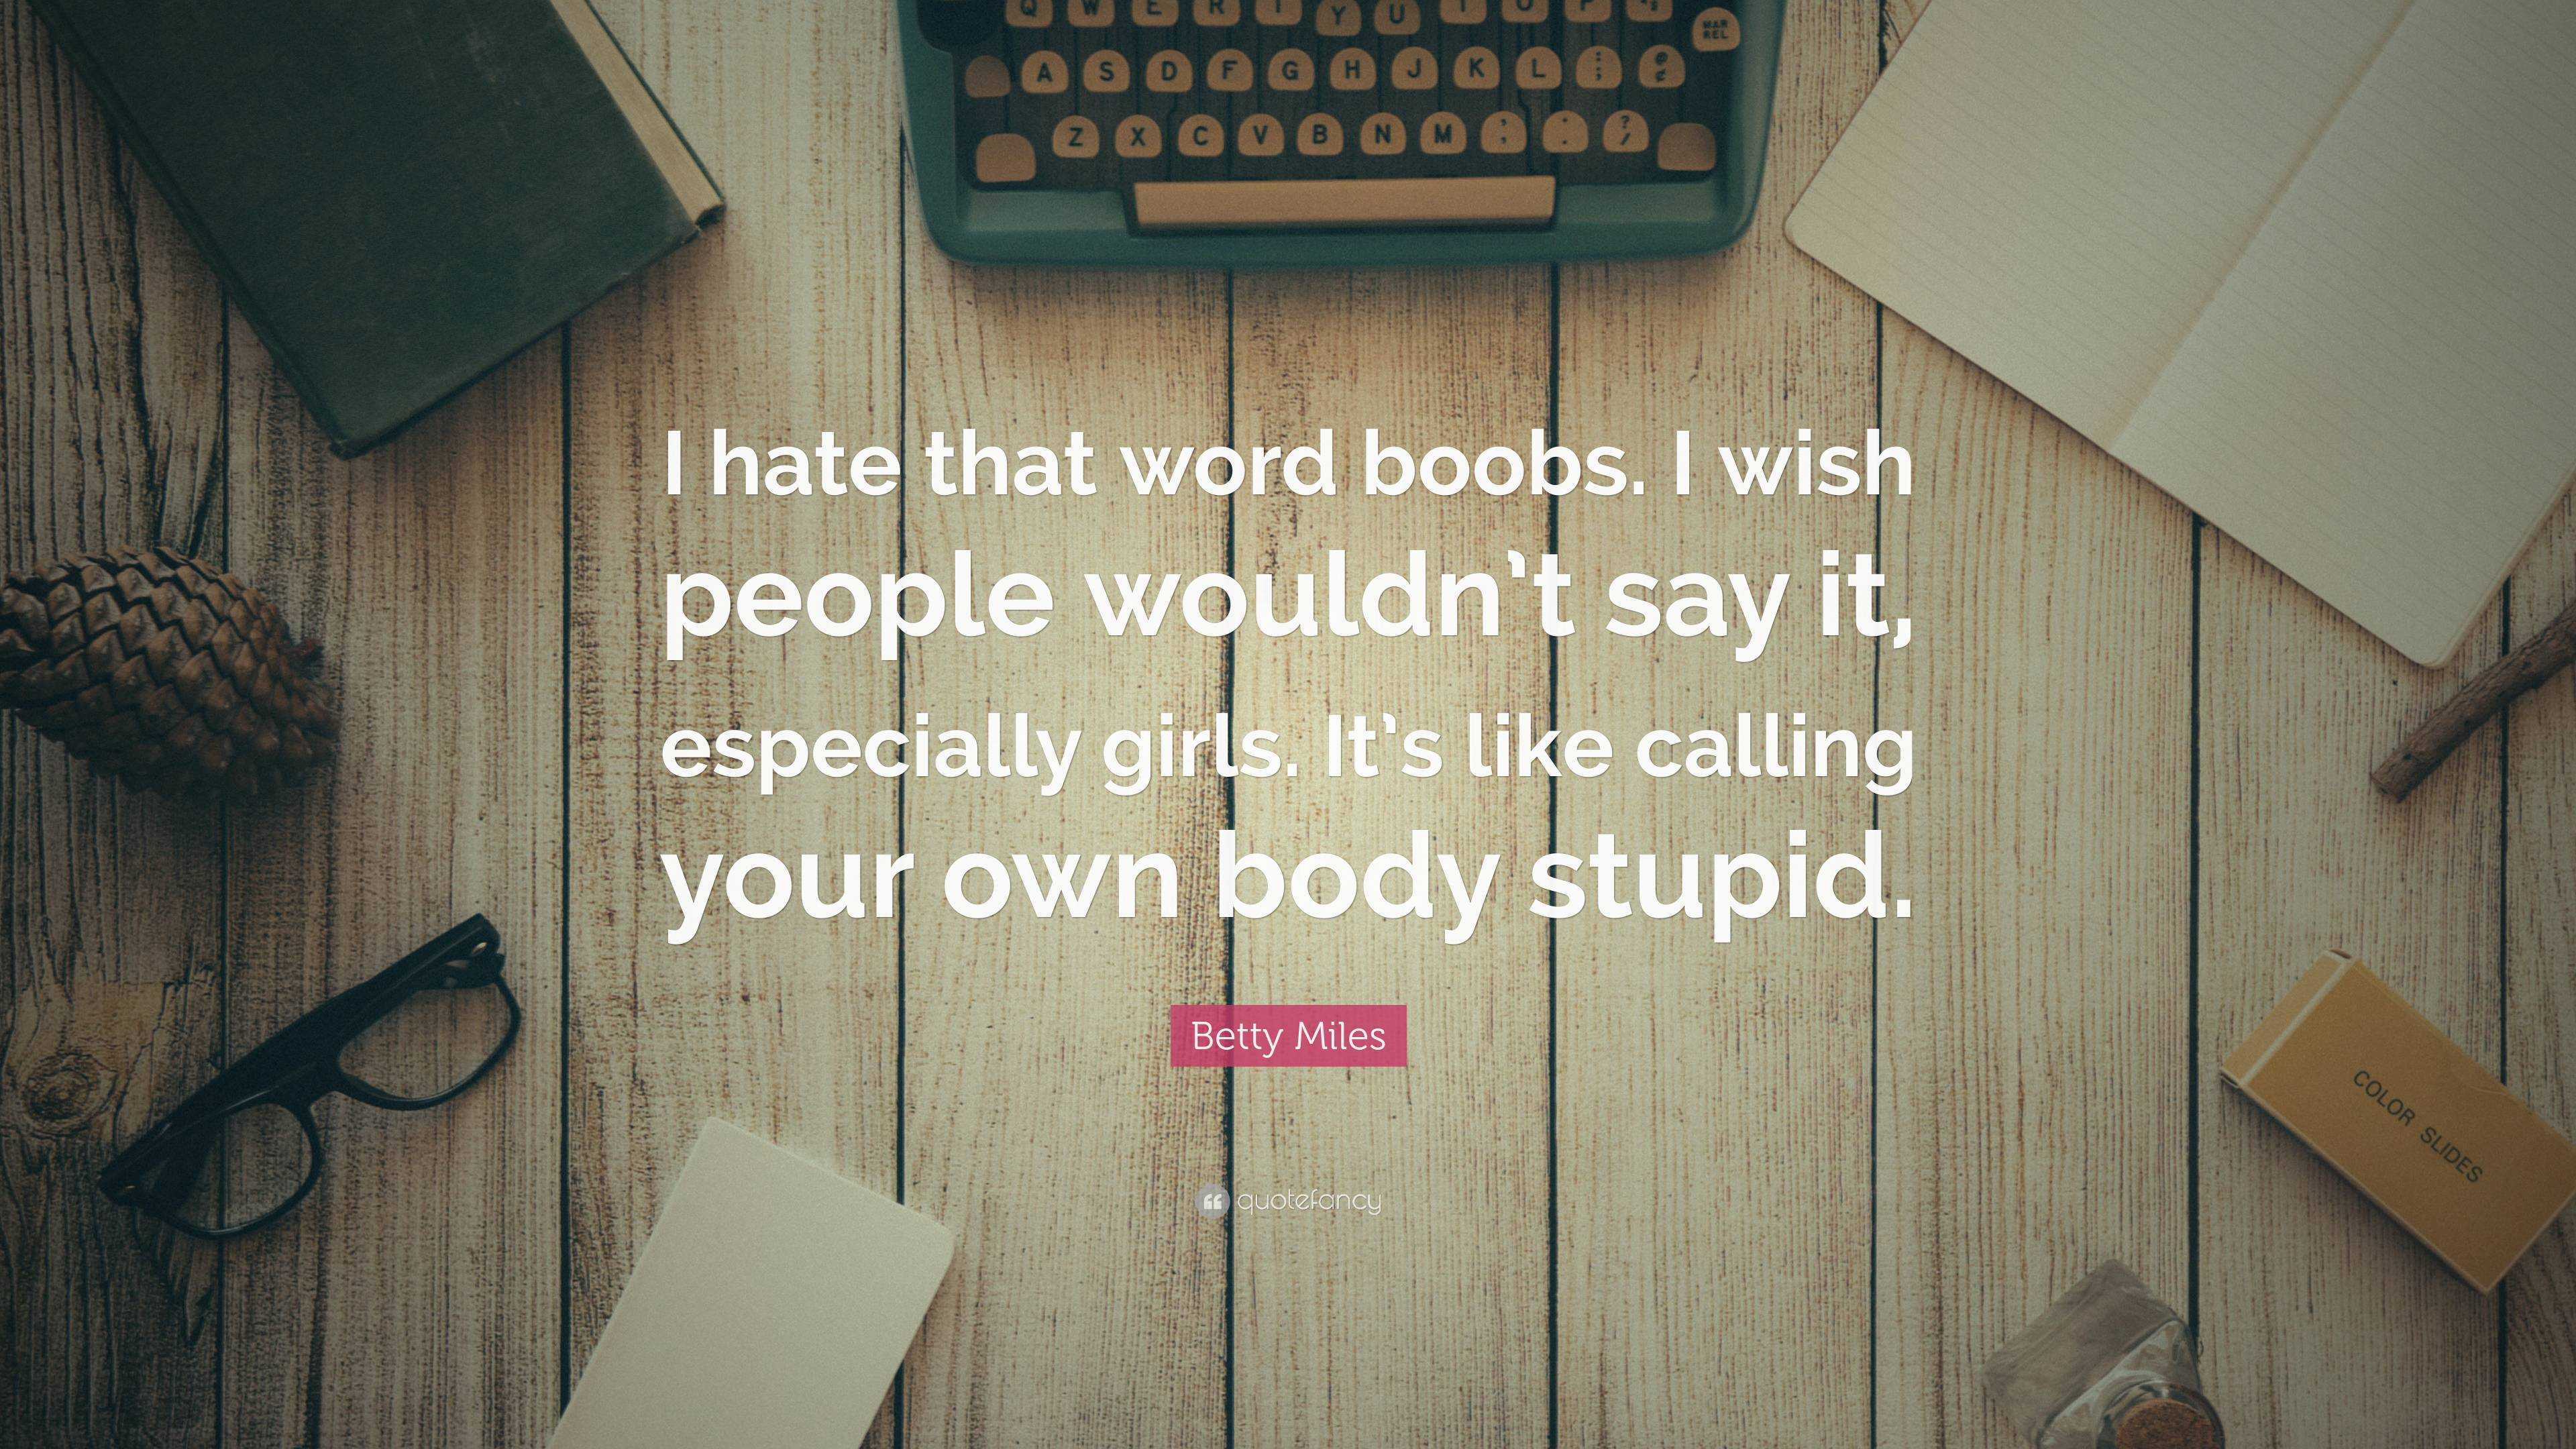 Betty Miles Quote: “I hate that word boobs. I wish people wouldn't